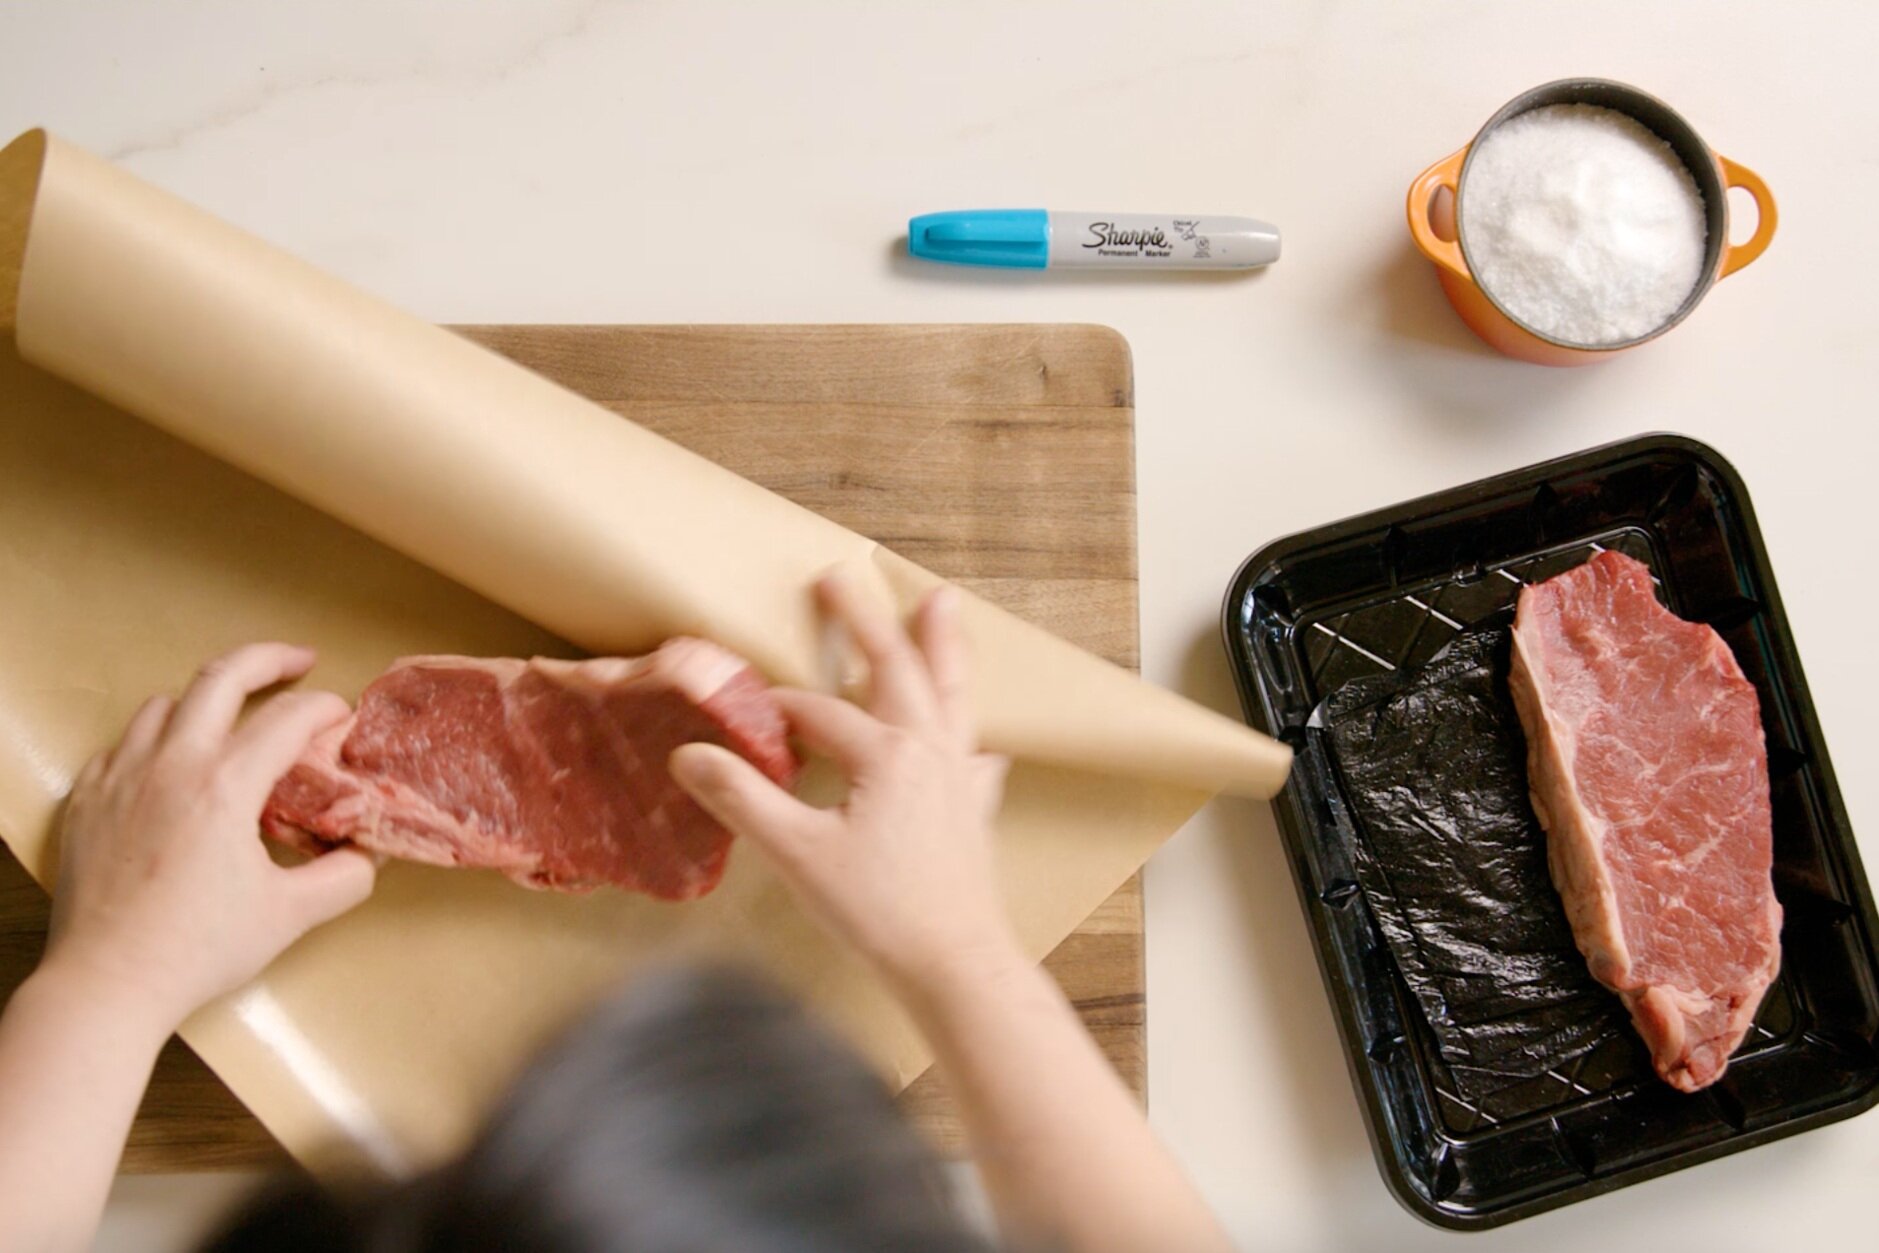 What works best for freezing fresh meat: paper freezer wrap